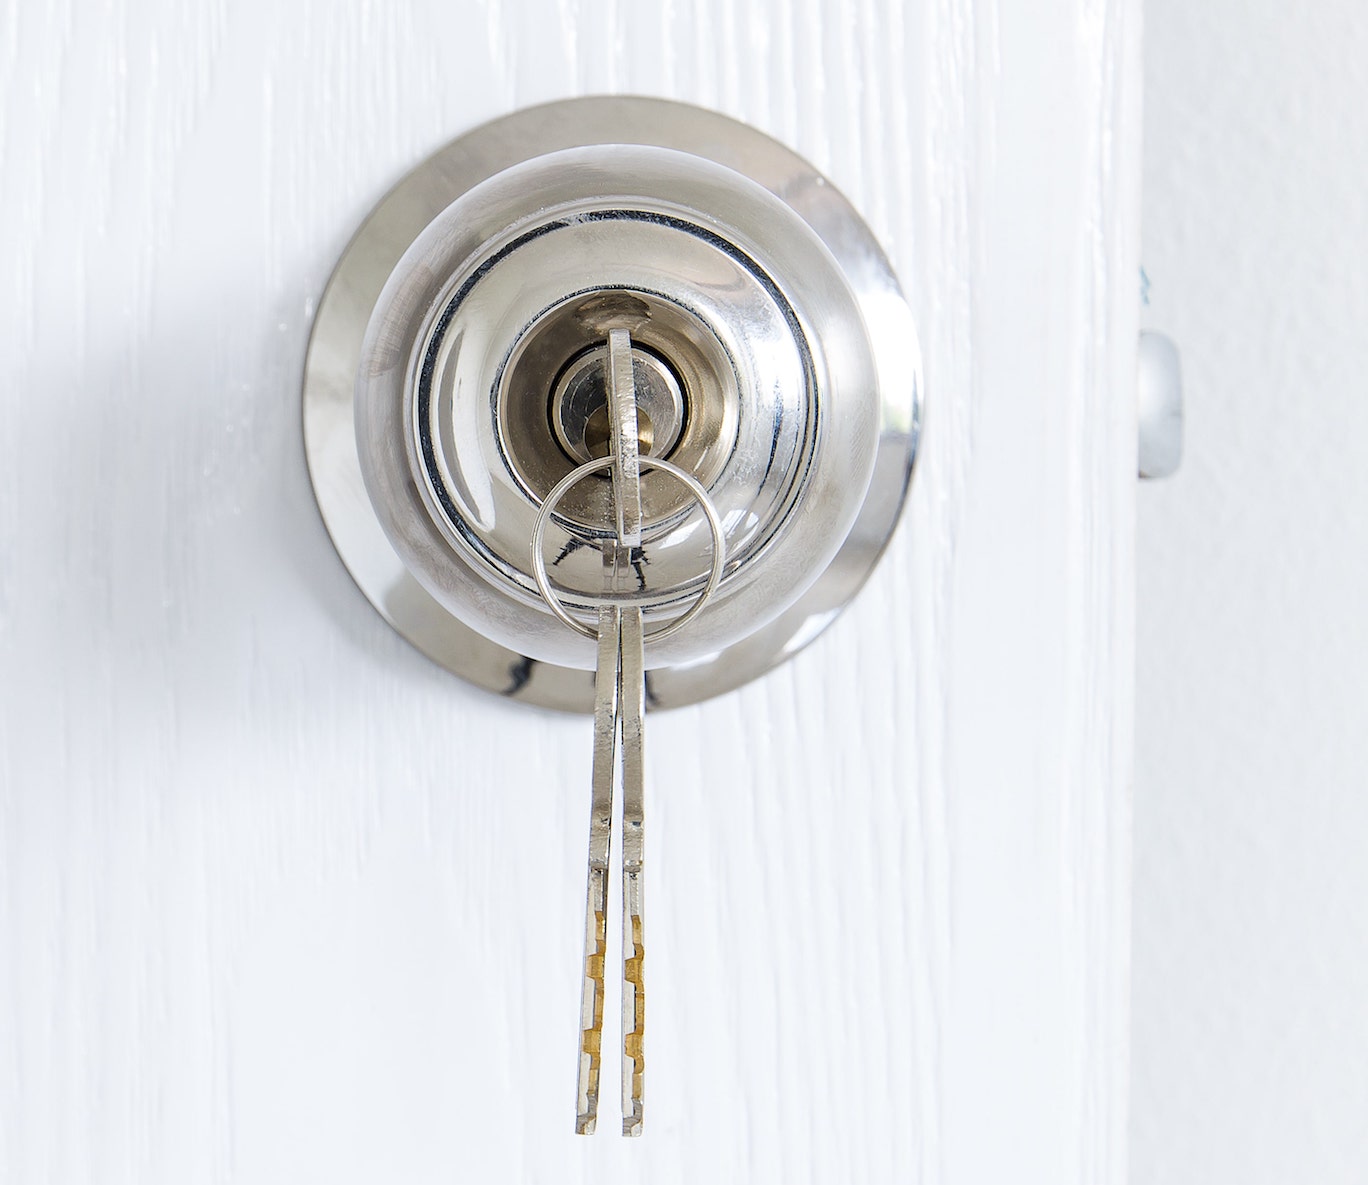 Lock and Key | Electronic Access Systems Inc.